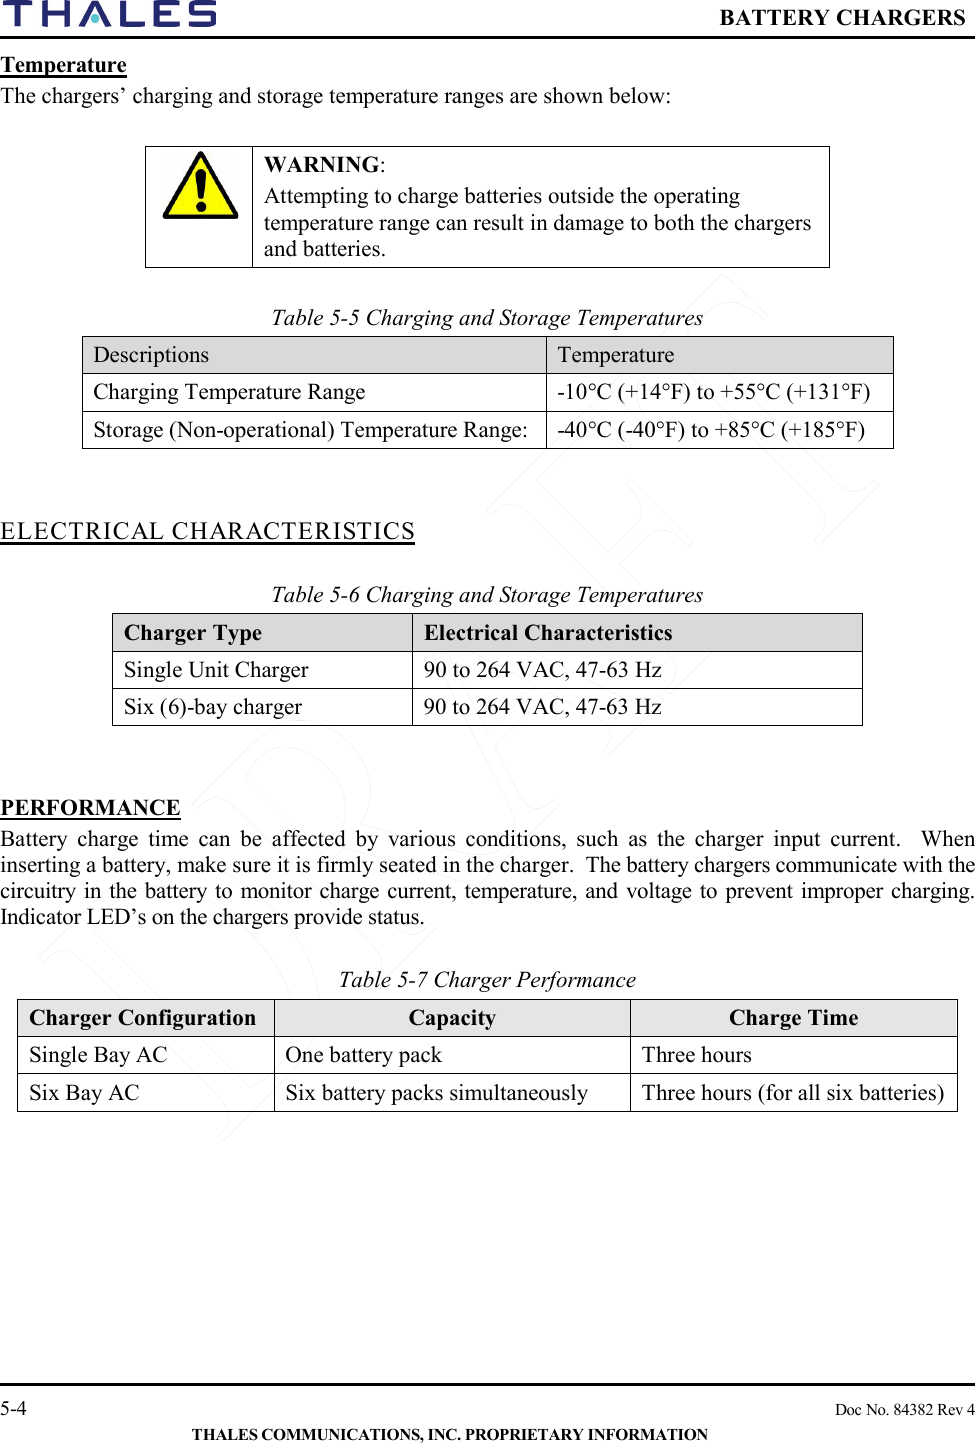  BATTERY CHARGERS   5-4    Doc No. 84382 Rev 4  THALES COMMUNICATIONS, INC. PROPRIETARY INFORMATION Temperature   The chargers’ charging and storage temperature ranges are shown below:   WARNING:  Attempting to charge batteries outside the operating temperature range can result in damage to both the chargers and batteries.   Table 5-5 Charging and Storage Temperatures Descriptions  Temperature Charging Temperature Range  -10°C (+14°F) to +55°C (+131°F) Storage (Non-operational) Temperature Range:  -40°C (-40°F) to +85°C (+185°F)   ELECTRICAL CHARACTERISTICS  Table 5-6 Charging and Storage Temperatures Charger Type   Electrical Characteristics Single Unit Charger  90 to 264 VAC, 47-63 Hz Six (6)-bay charger  90 to 264 VAC, 47-63 Hz   PERFORMANCE Battery charge time can be affected by various conditions, such as the charger input current.  When inserting a battery, make sure it is firmly seated in the charger.  The battery chargers communicate with the circuitry in the battery to monitor charge current, temperature, and voltage to prevent improper charging.  Indicator LED’s on the chargers provide status.       Table 5-7 Charger Performance Charger Configuration Capacity  Charge Time Single Bay AC  One battery pack Three hours Six Bay AC   Six battery packs simultaneously  Three hours (for all six batteries)   